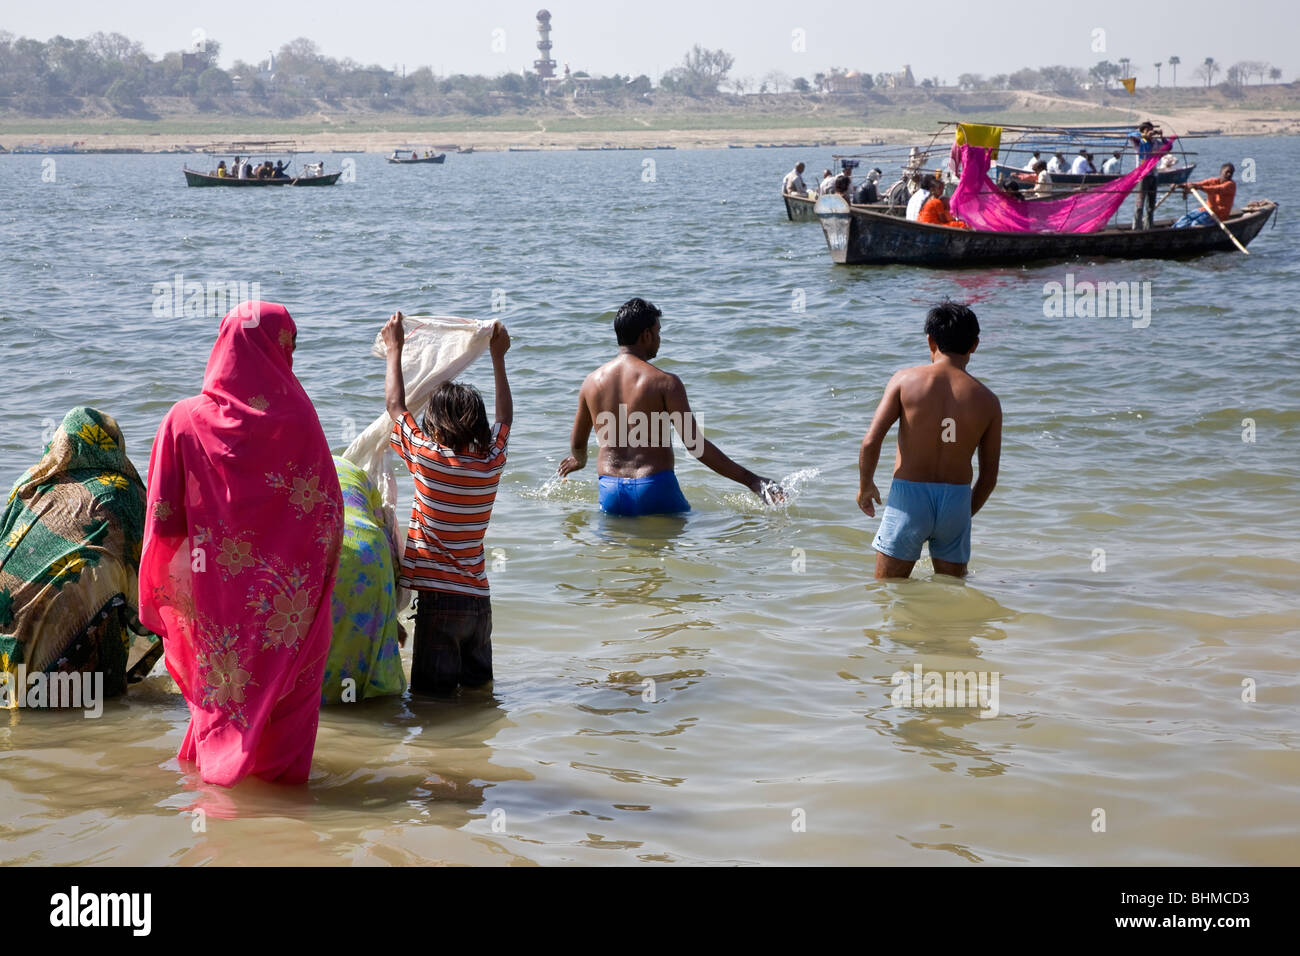 Hindu pilgrims bathing in the confluence of the Ganges and Yamuna rivers (Sangam). Allahabad. India Stock Photo